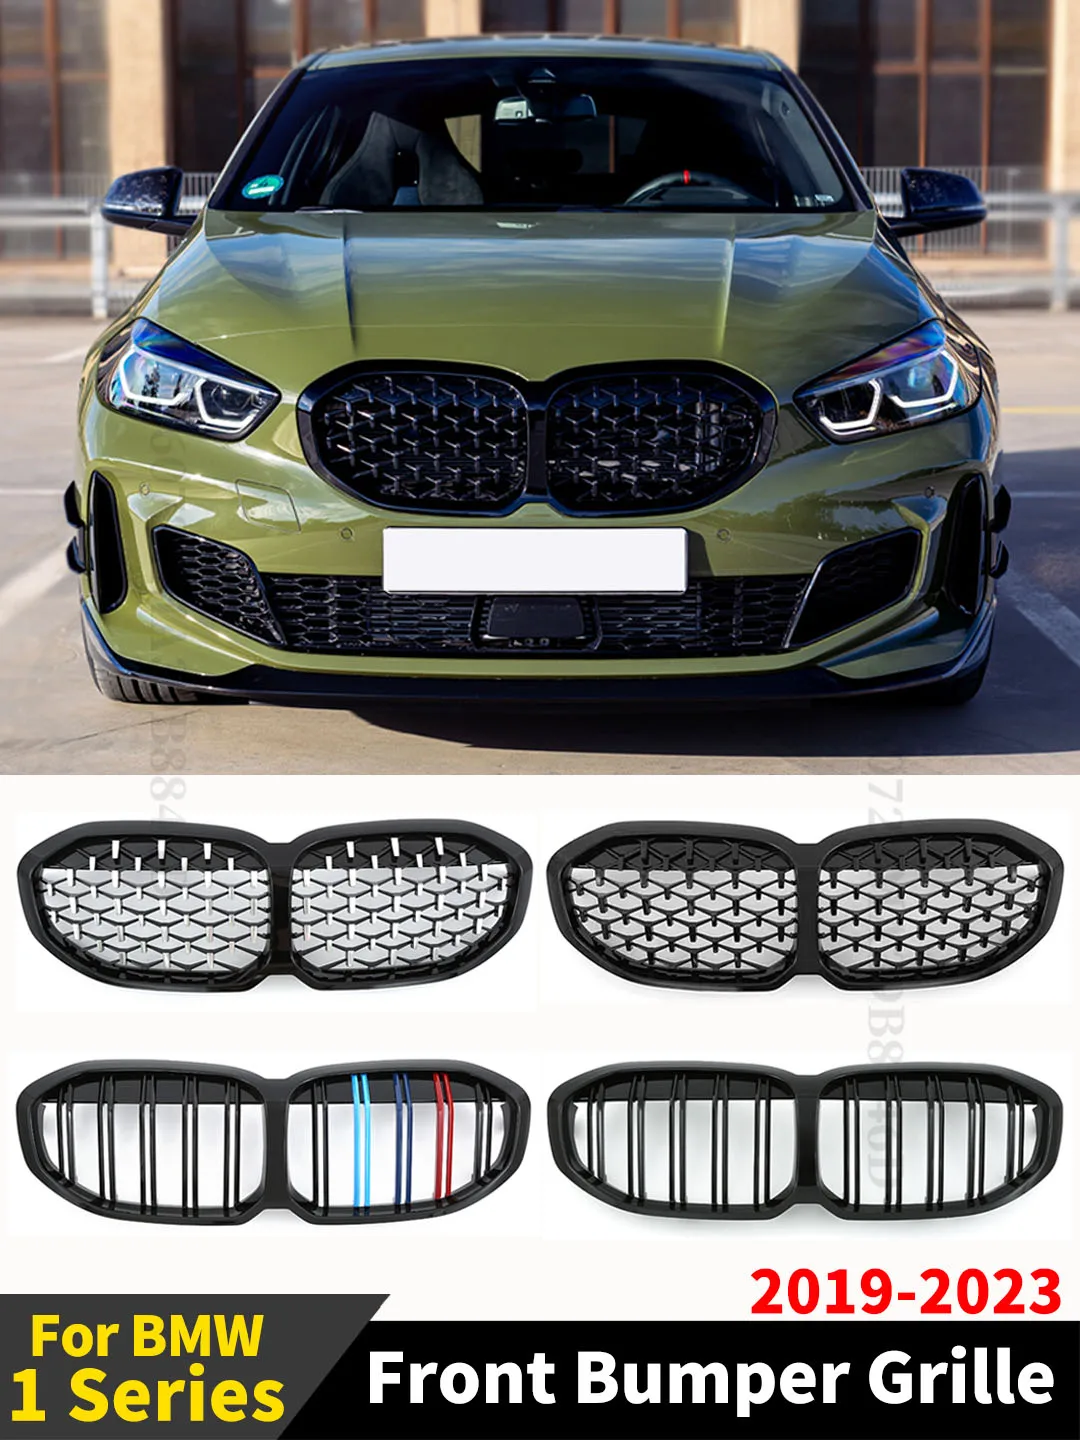 

For BMW 1 Series F40 2019-2023 128ti M135i xDrive 118i and M Sport Front Kidney Grill Body Kit Tuning Bumper Replacement Grille